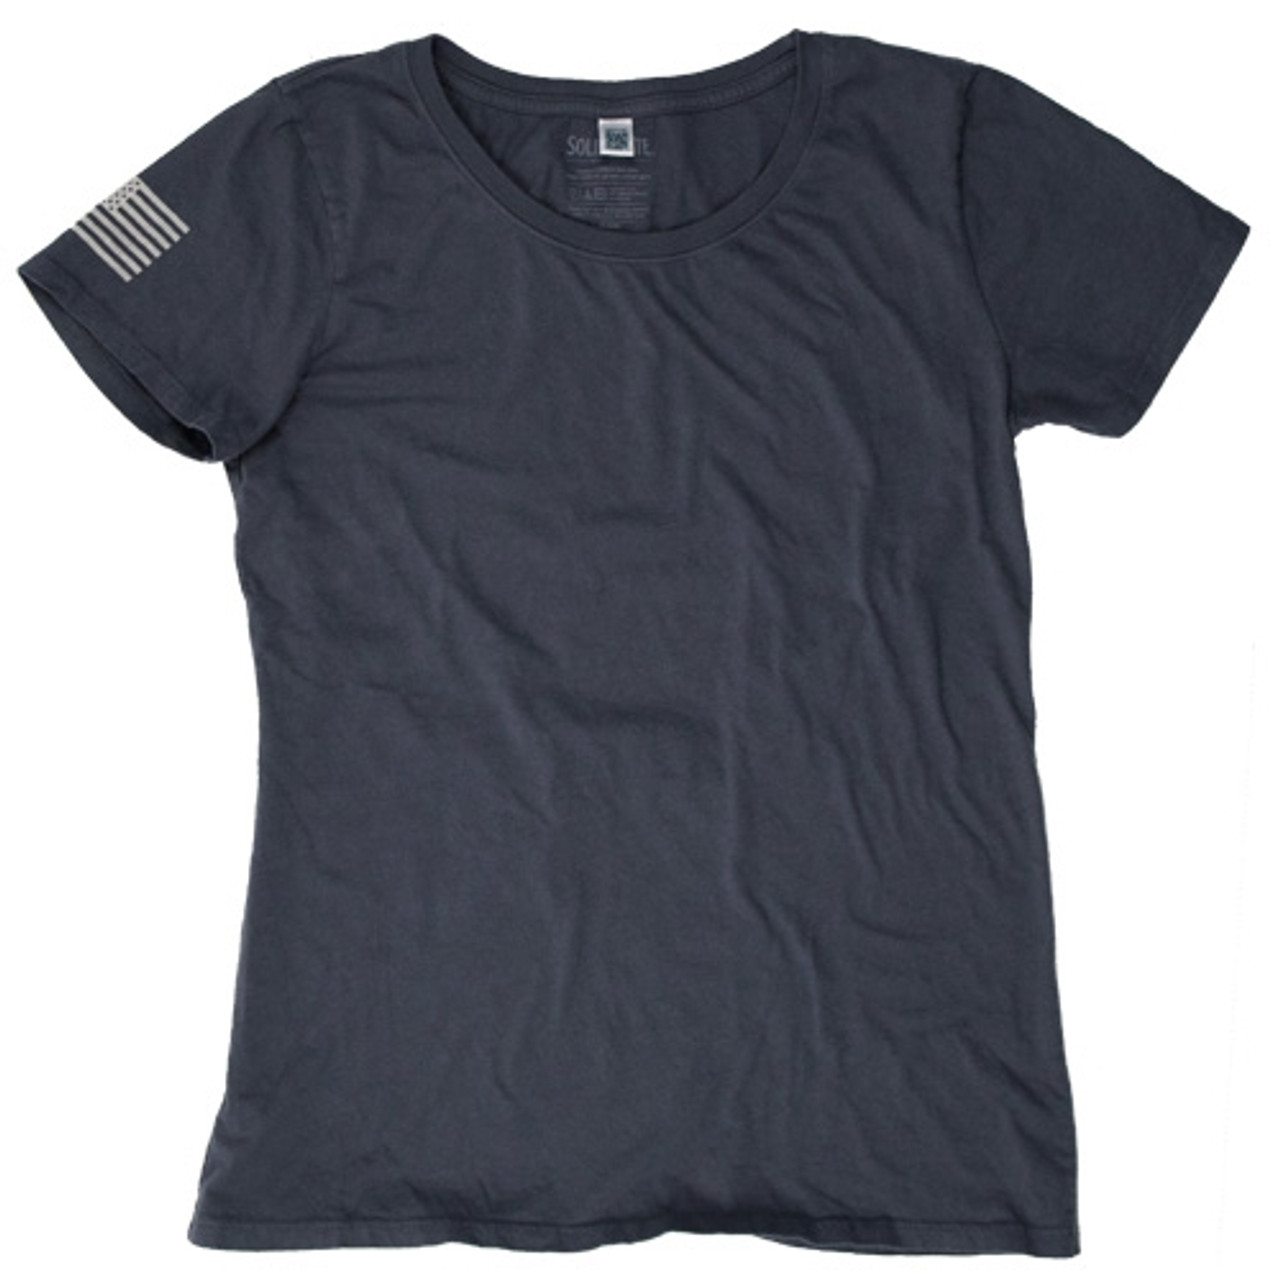 Solid State Great American Women's T-shirt posted by ProdOrigin USA in Women's Apparel 